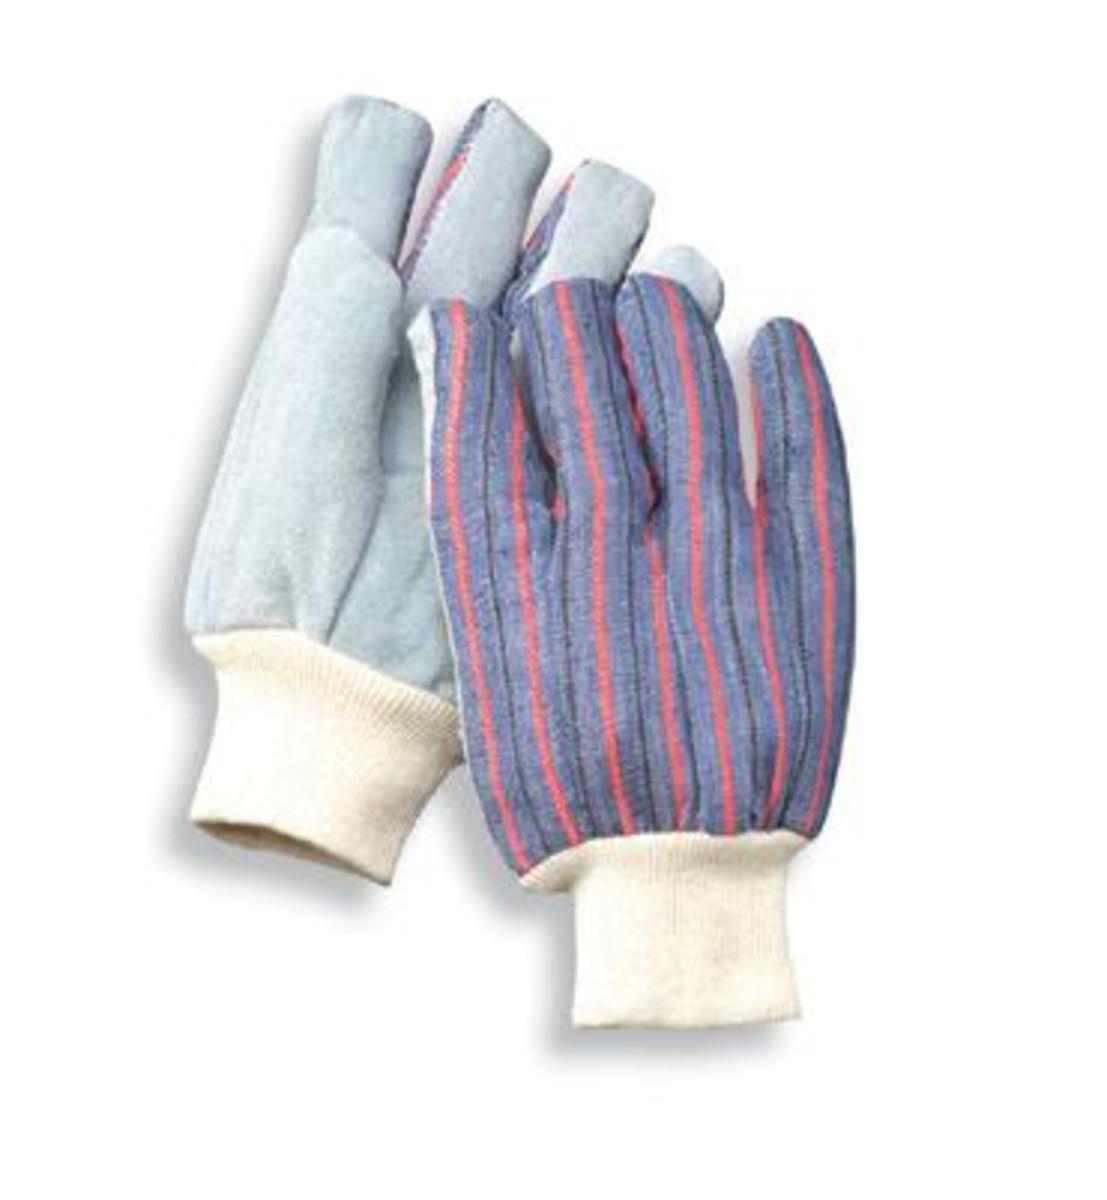 RADNOR® Large Economy Grade Split Leather Palm Gloves With Canvas Back And Knit Wrist